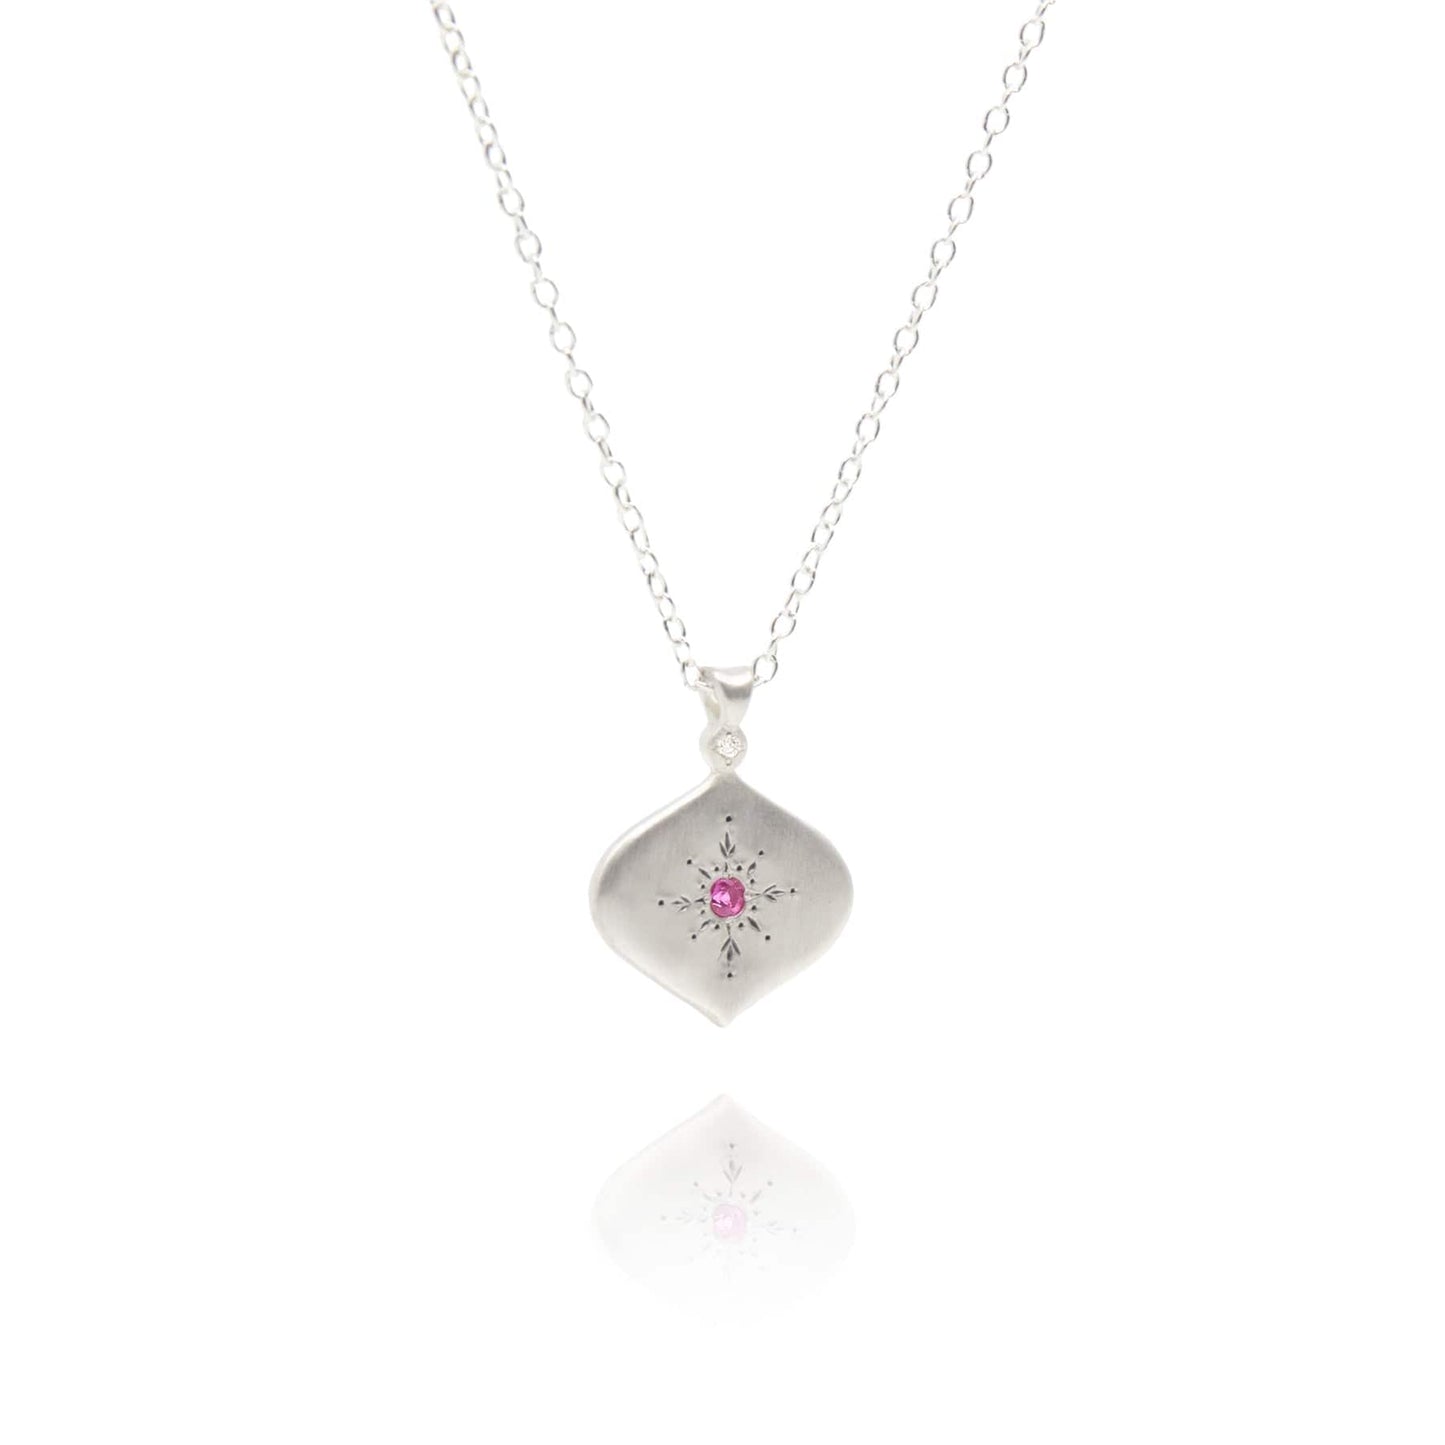 NKL North Star Pendant in Pink Sapphire